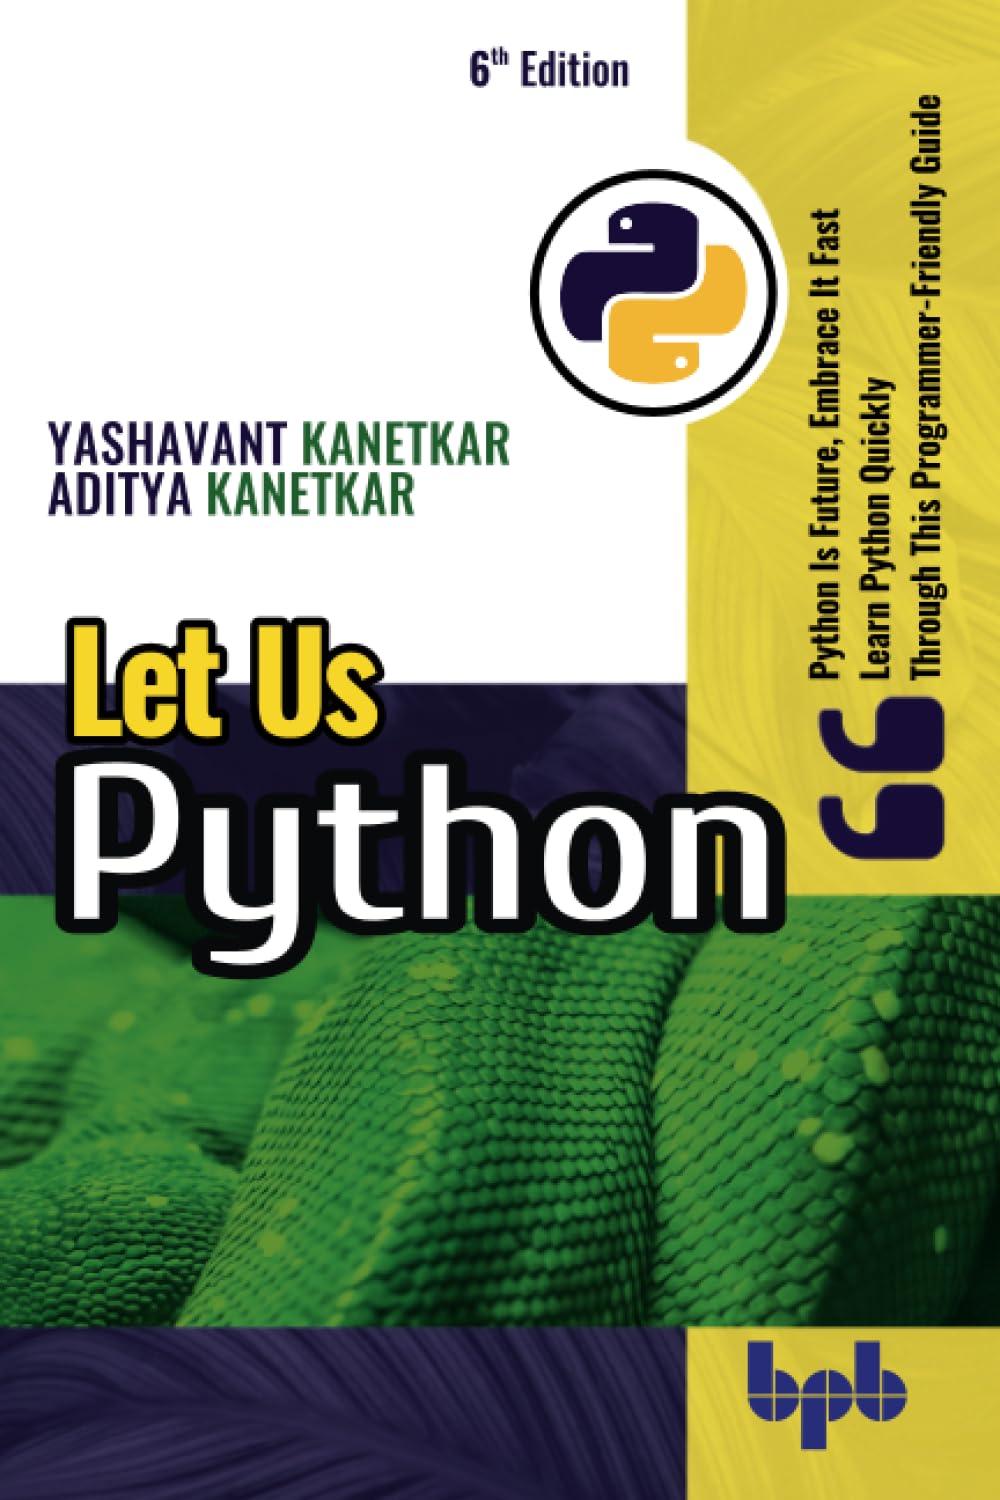 let us python python is future embrace it fast learn python quickly a programmer friendly guide 6th edition